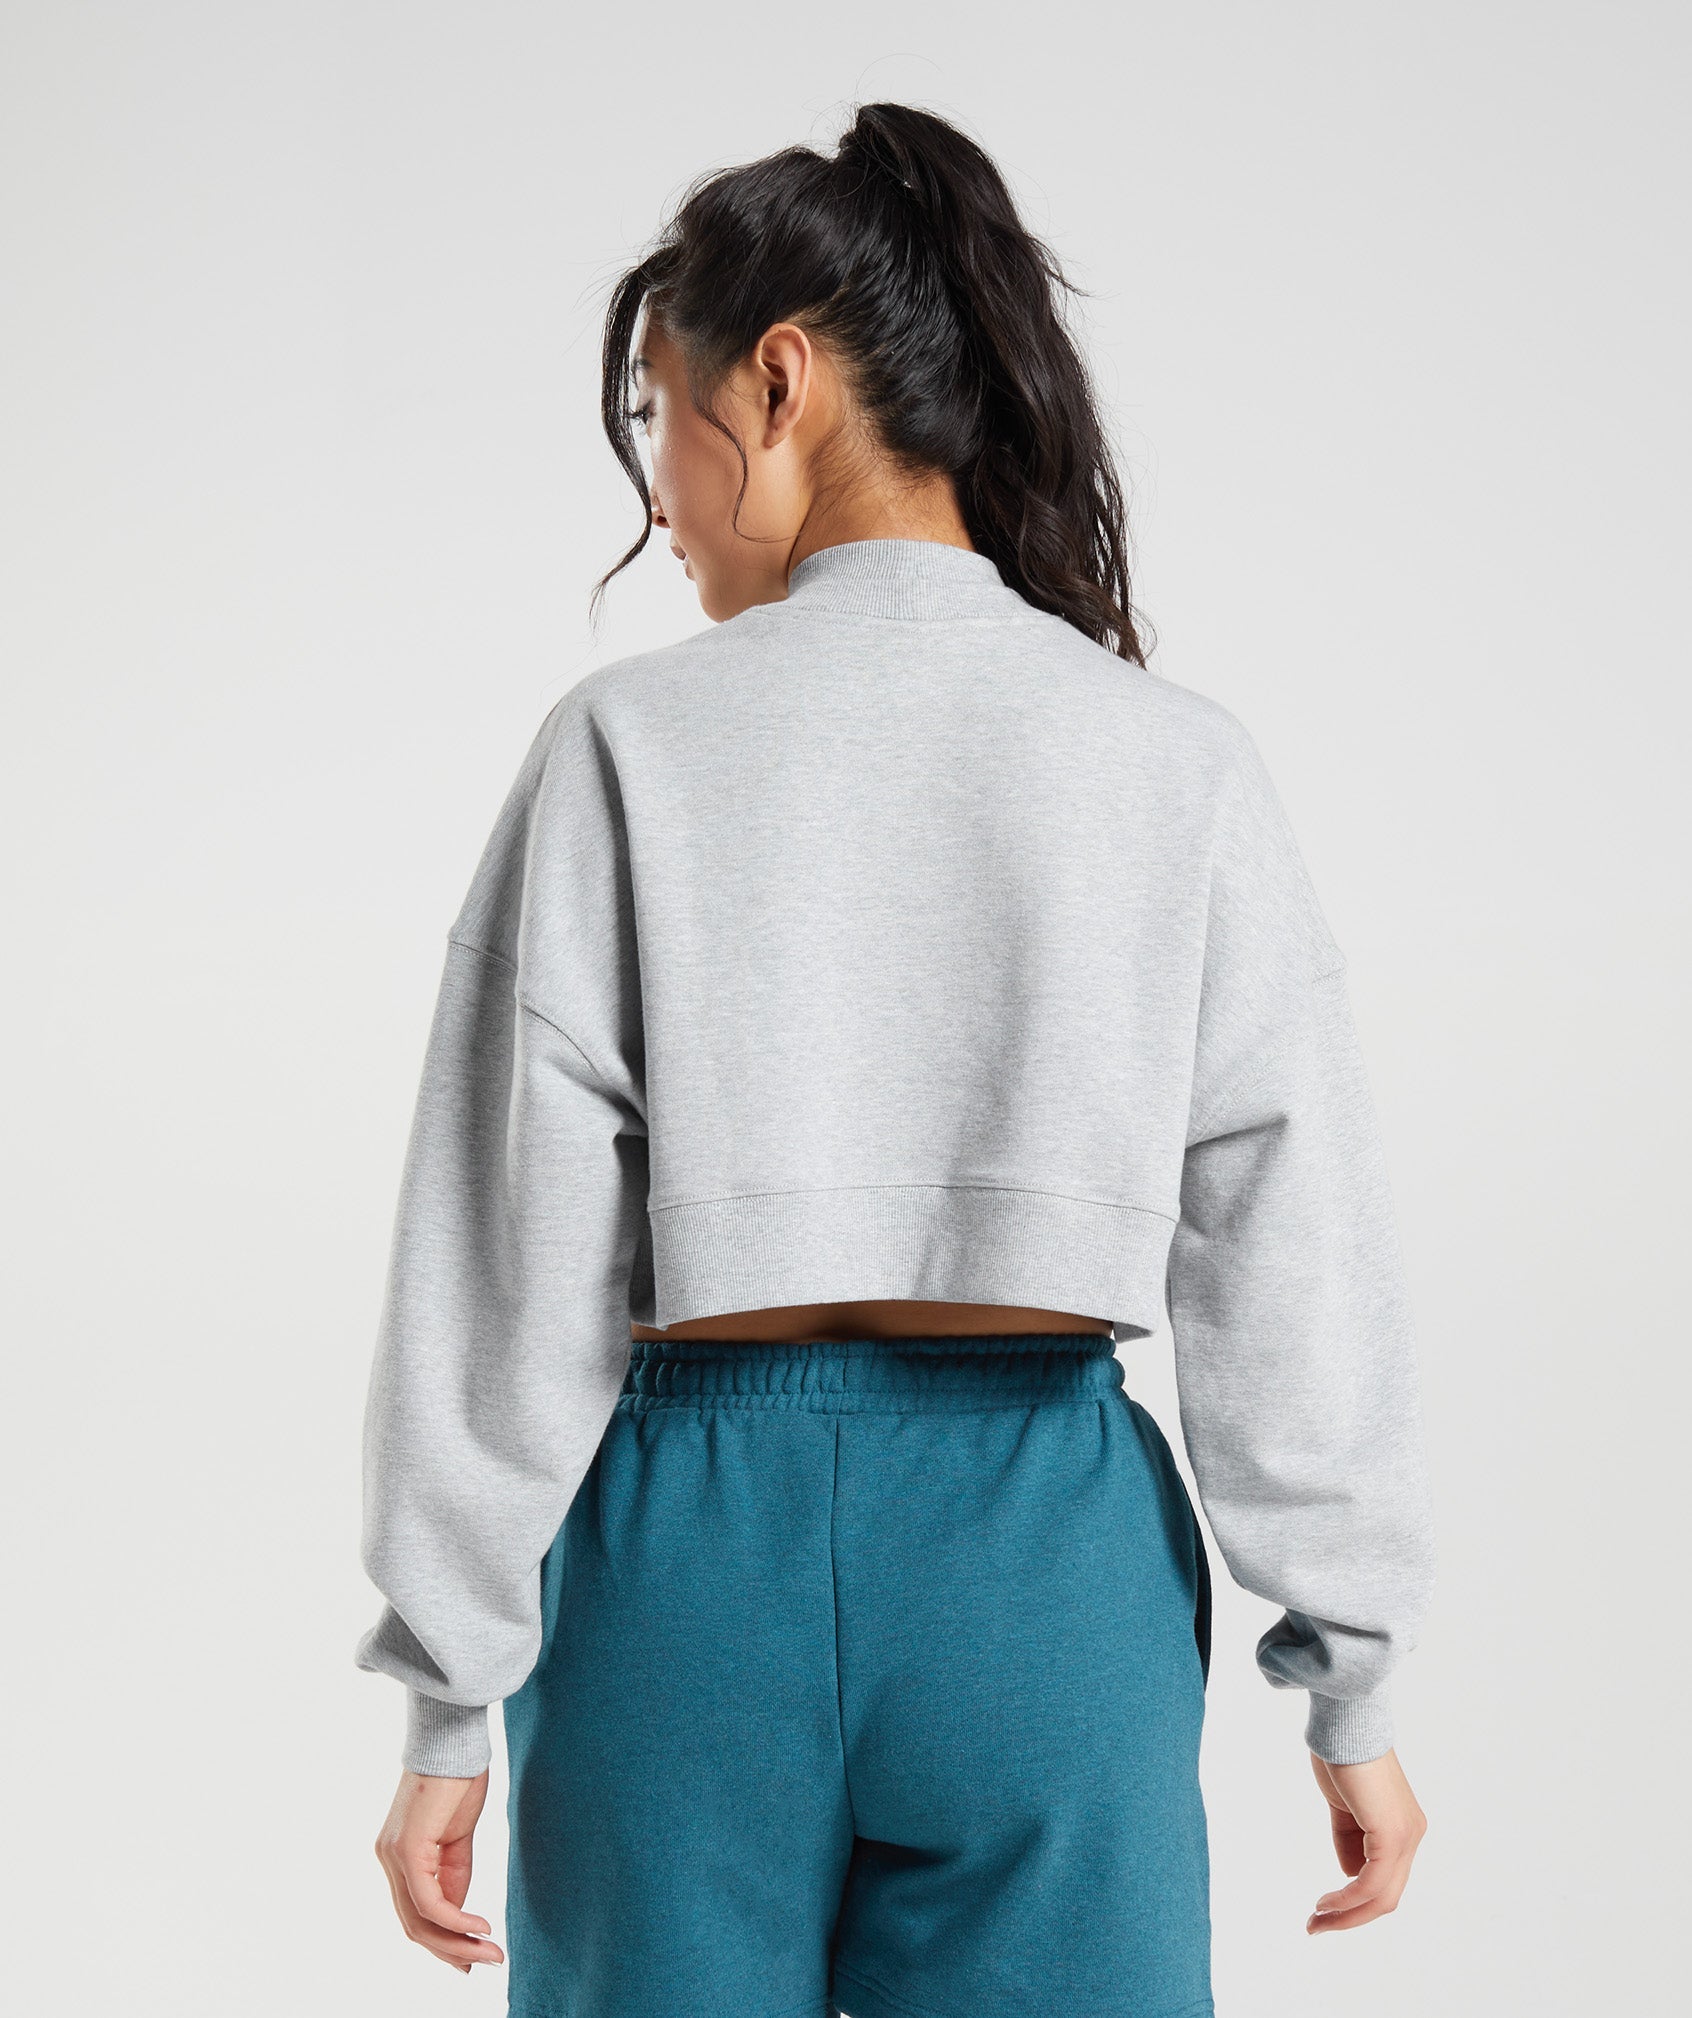 Rest Day Sweats Cropped Pullover in Light Grey Core Marl